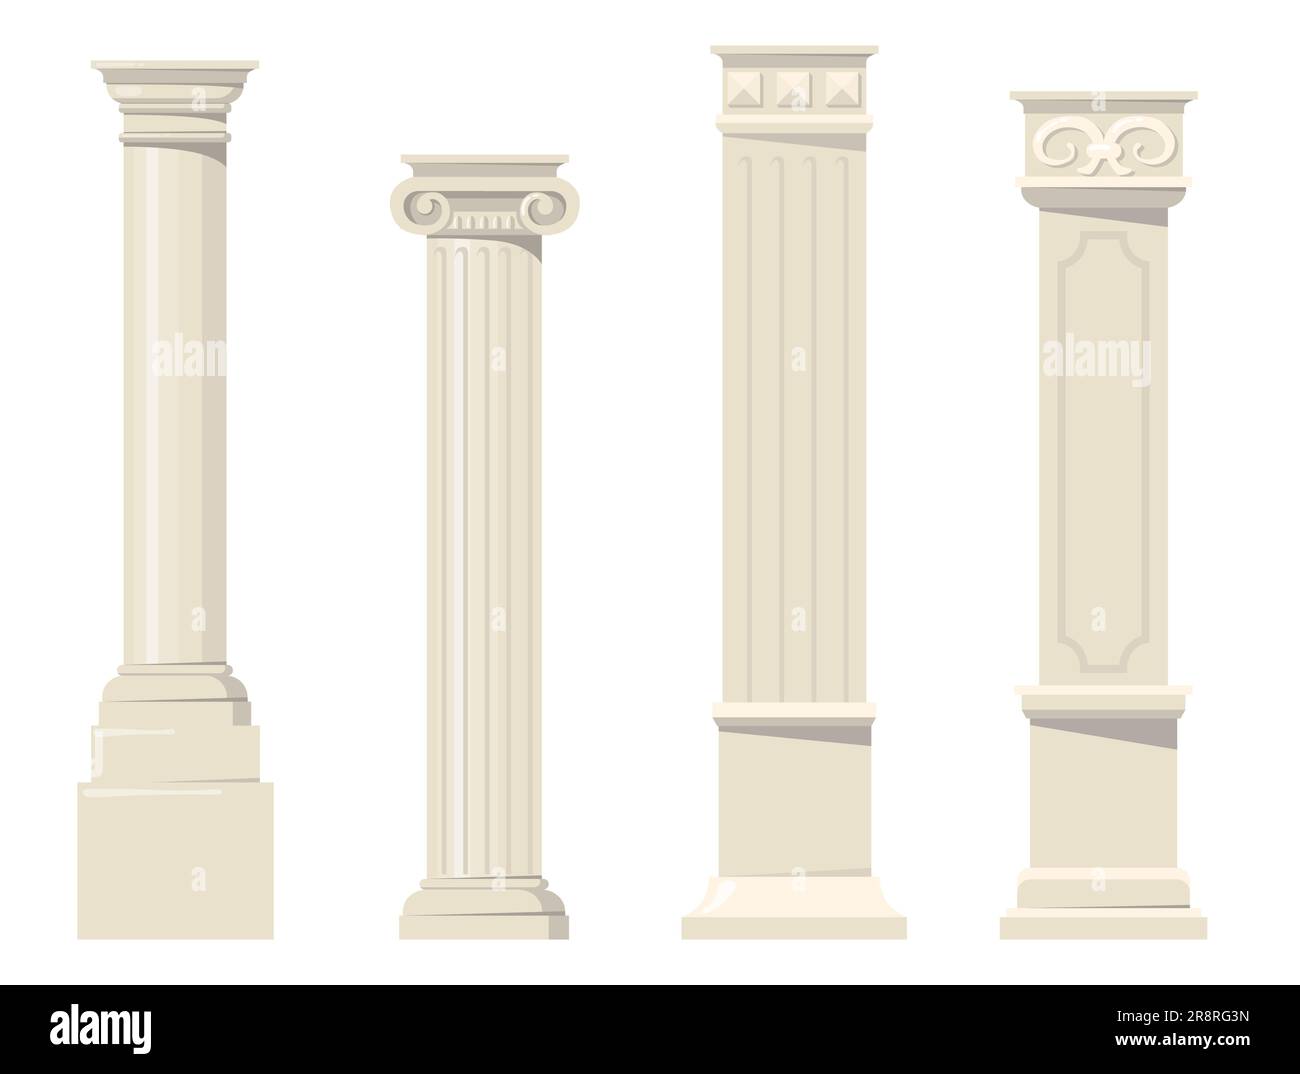 Vintage classic carved architectural pillars Stock Vector